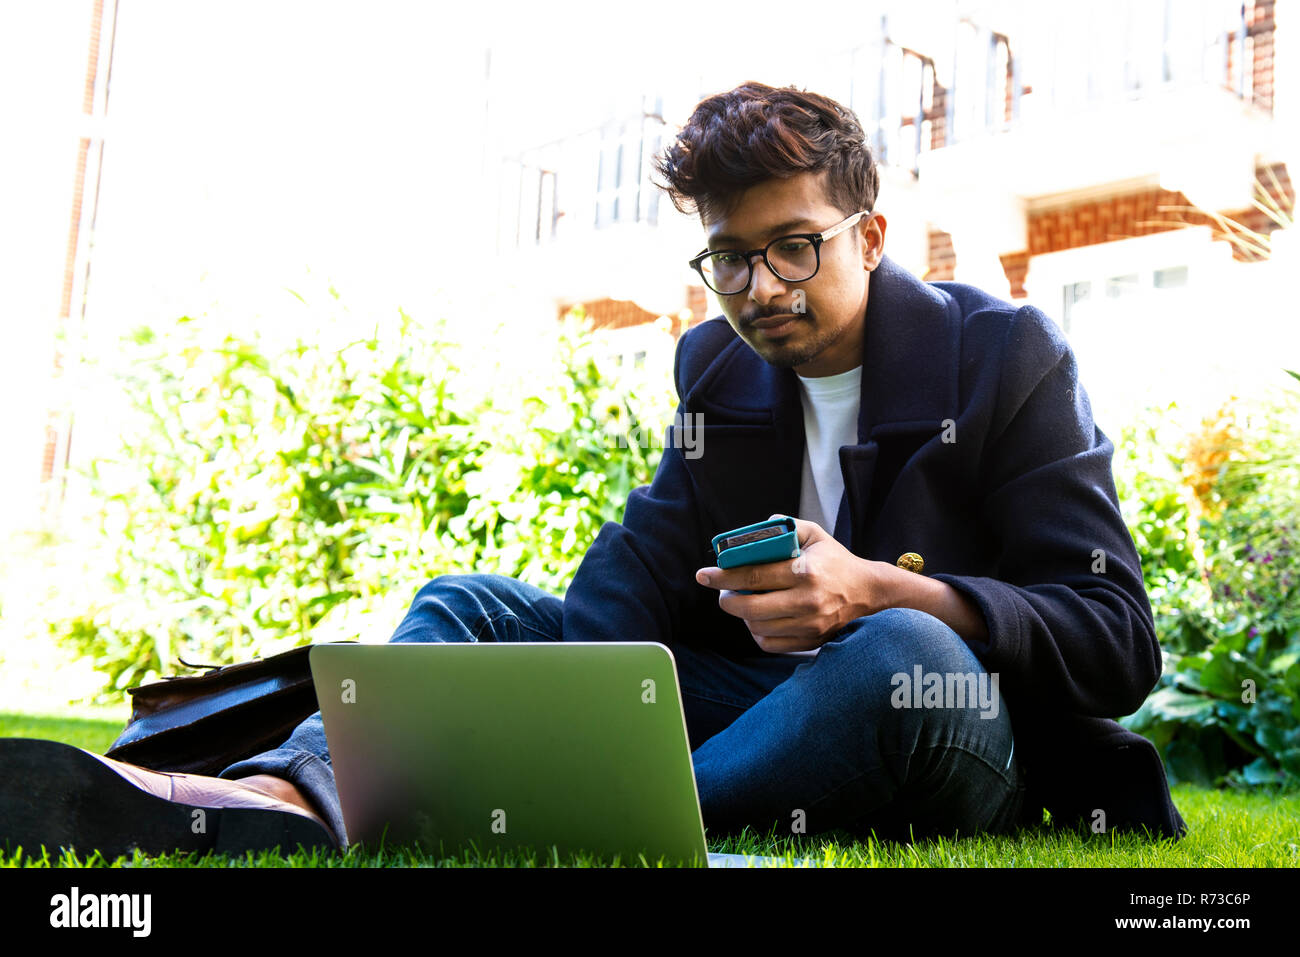 Businessman using smartphone and laptop on grass Stock Photo